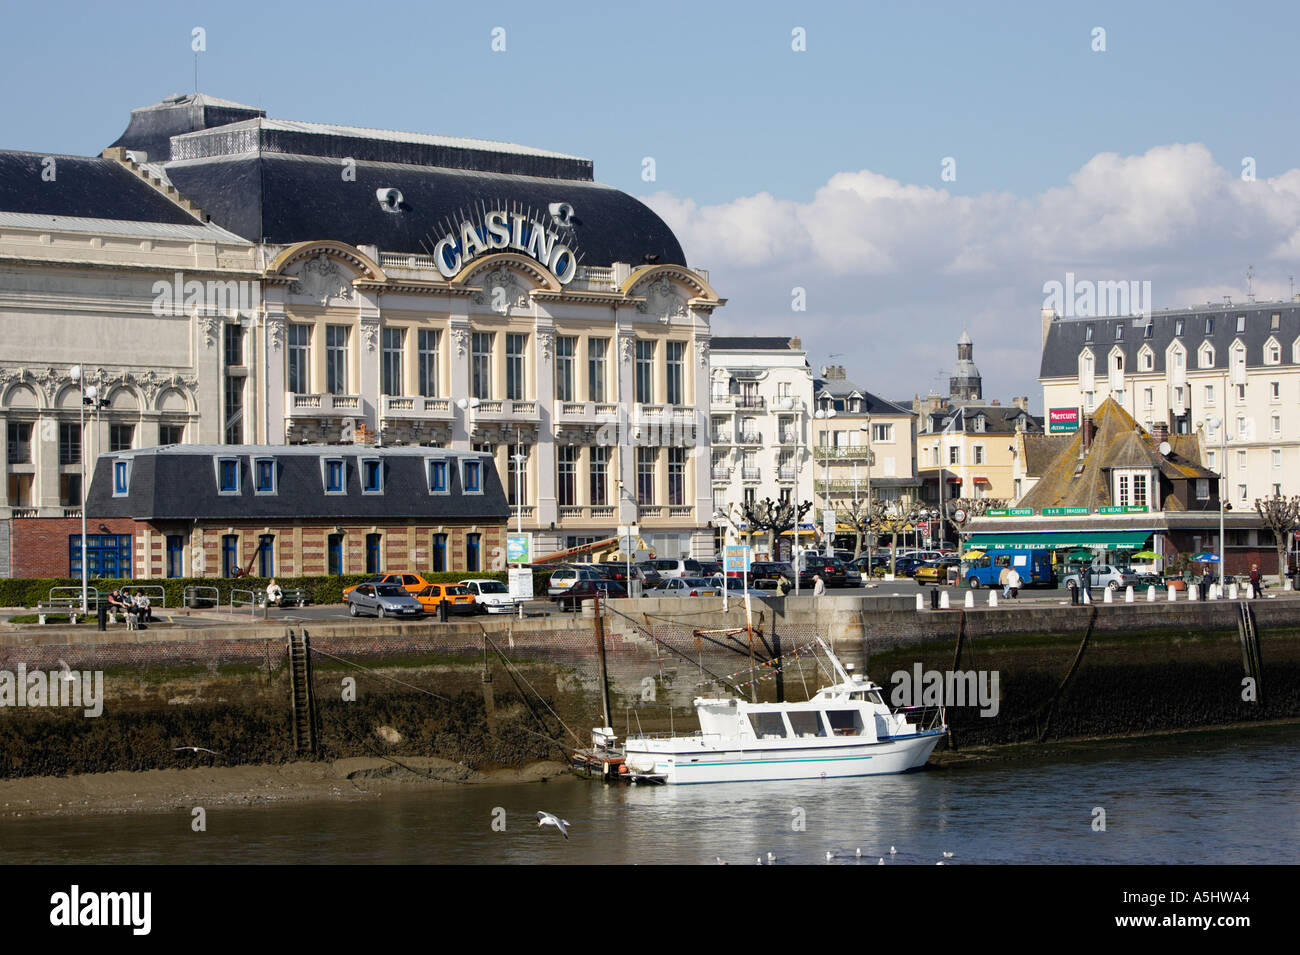 Trouville sur mer, the Casino and river Touques, Normandy, France Stock Photo